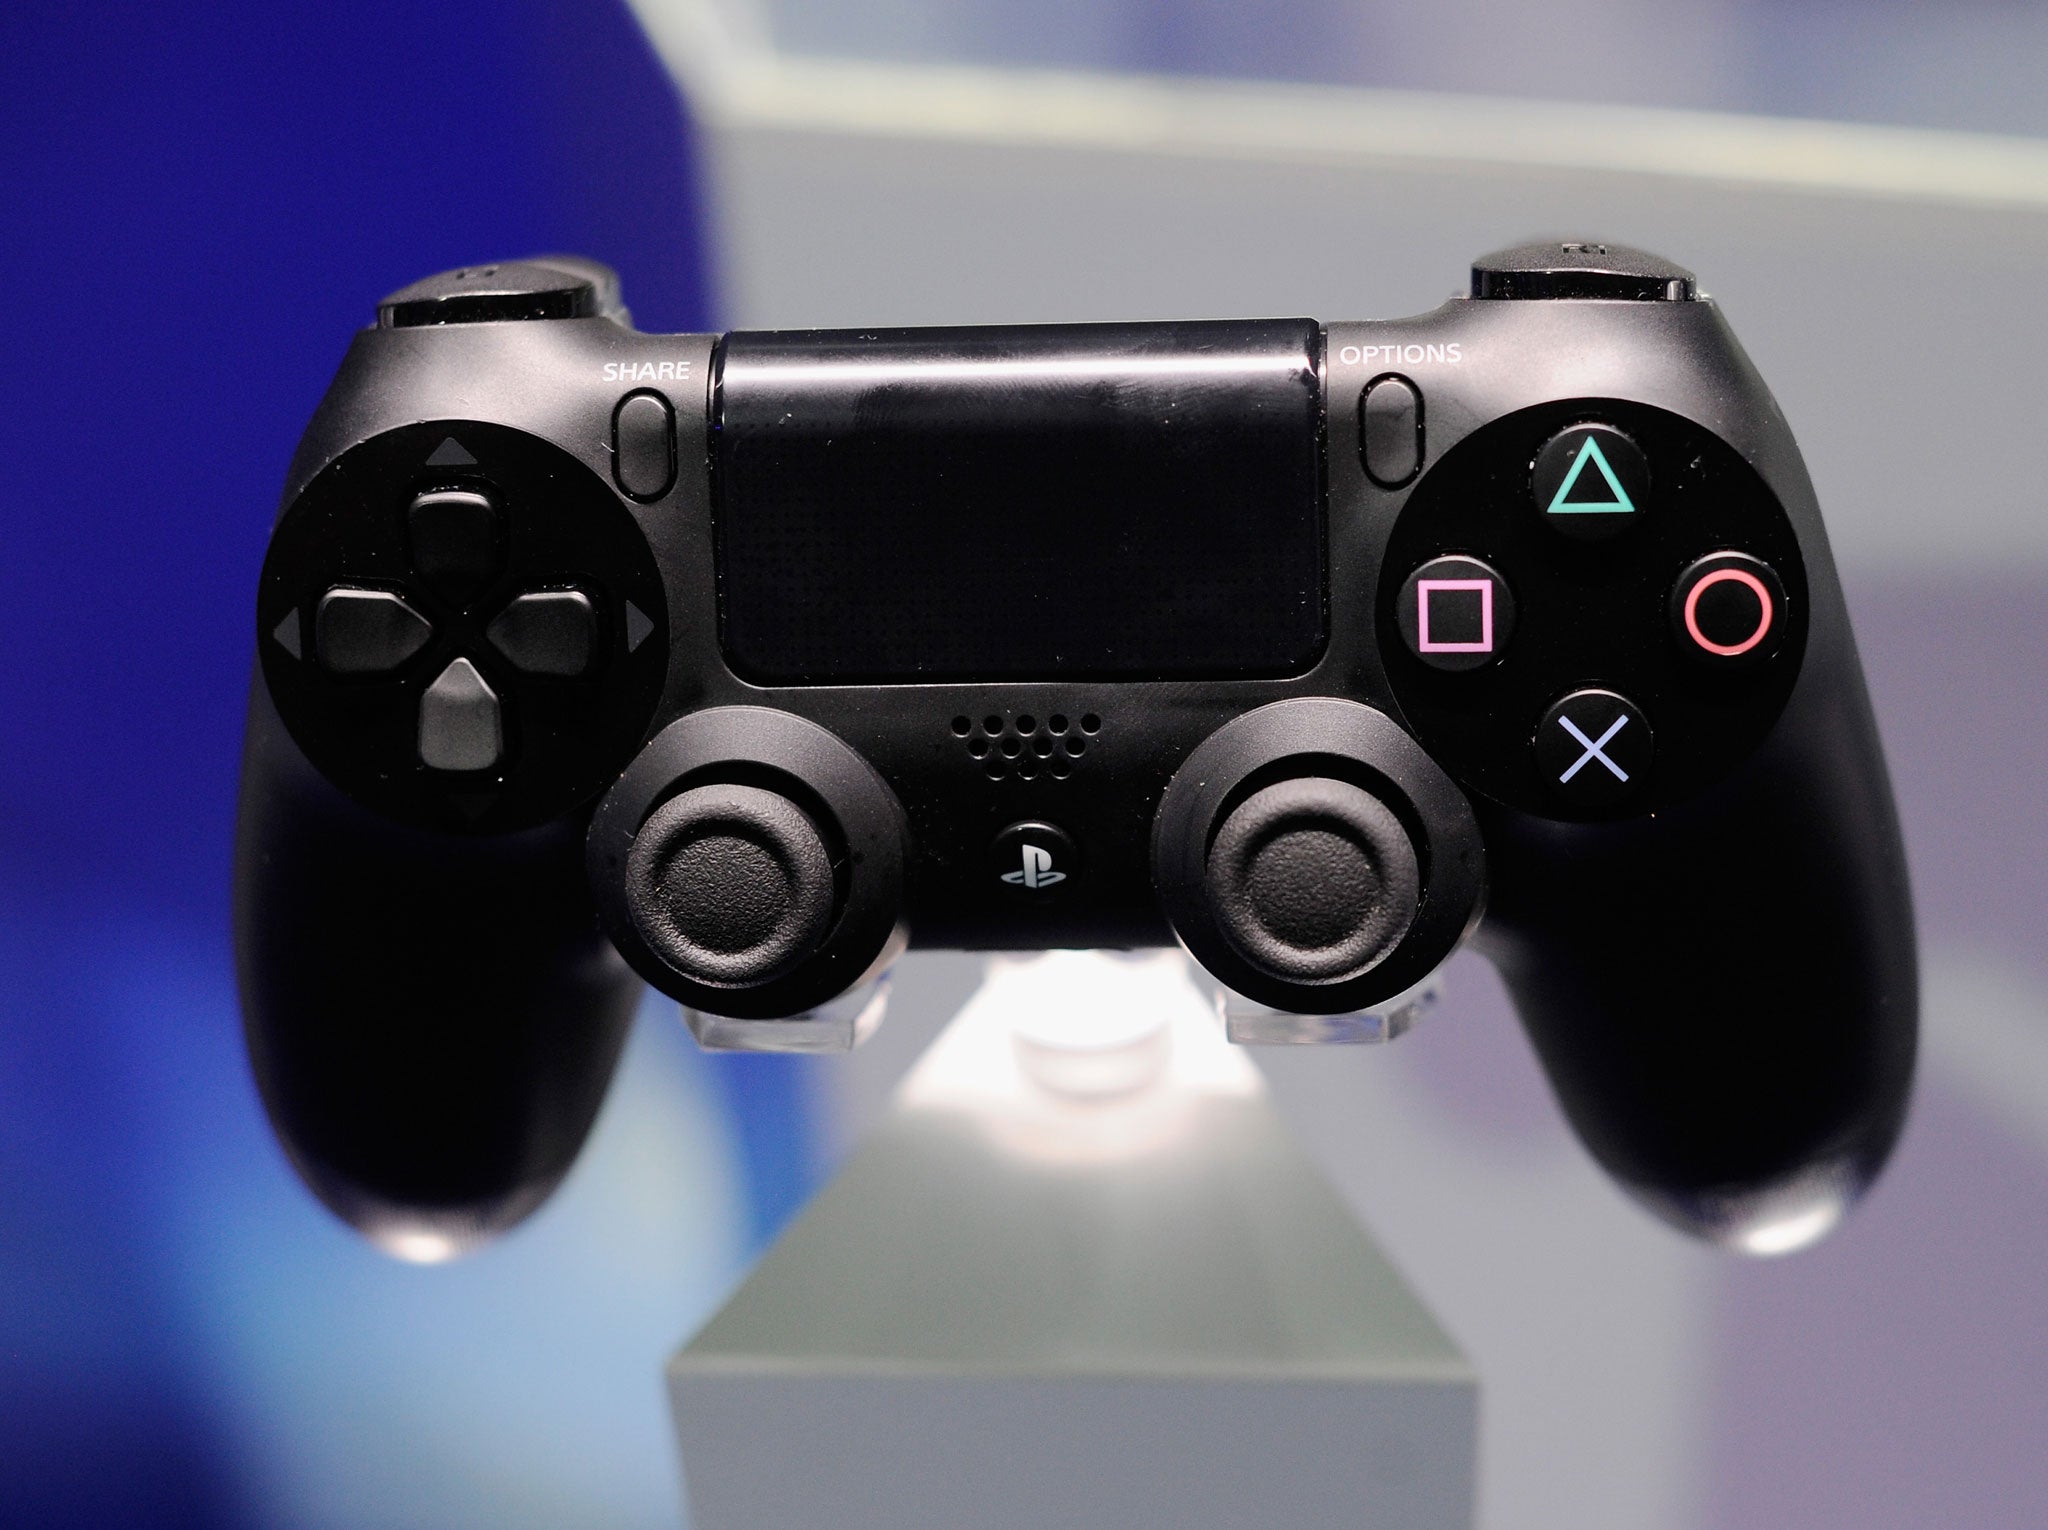 The DualShock 4 controller: heavier and 'grippier' with a touchpad and lightbar sensor.